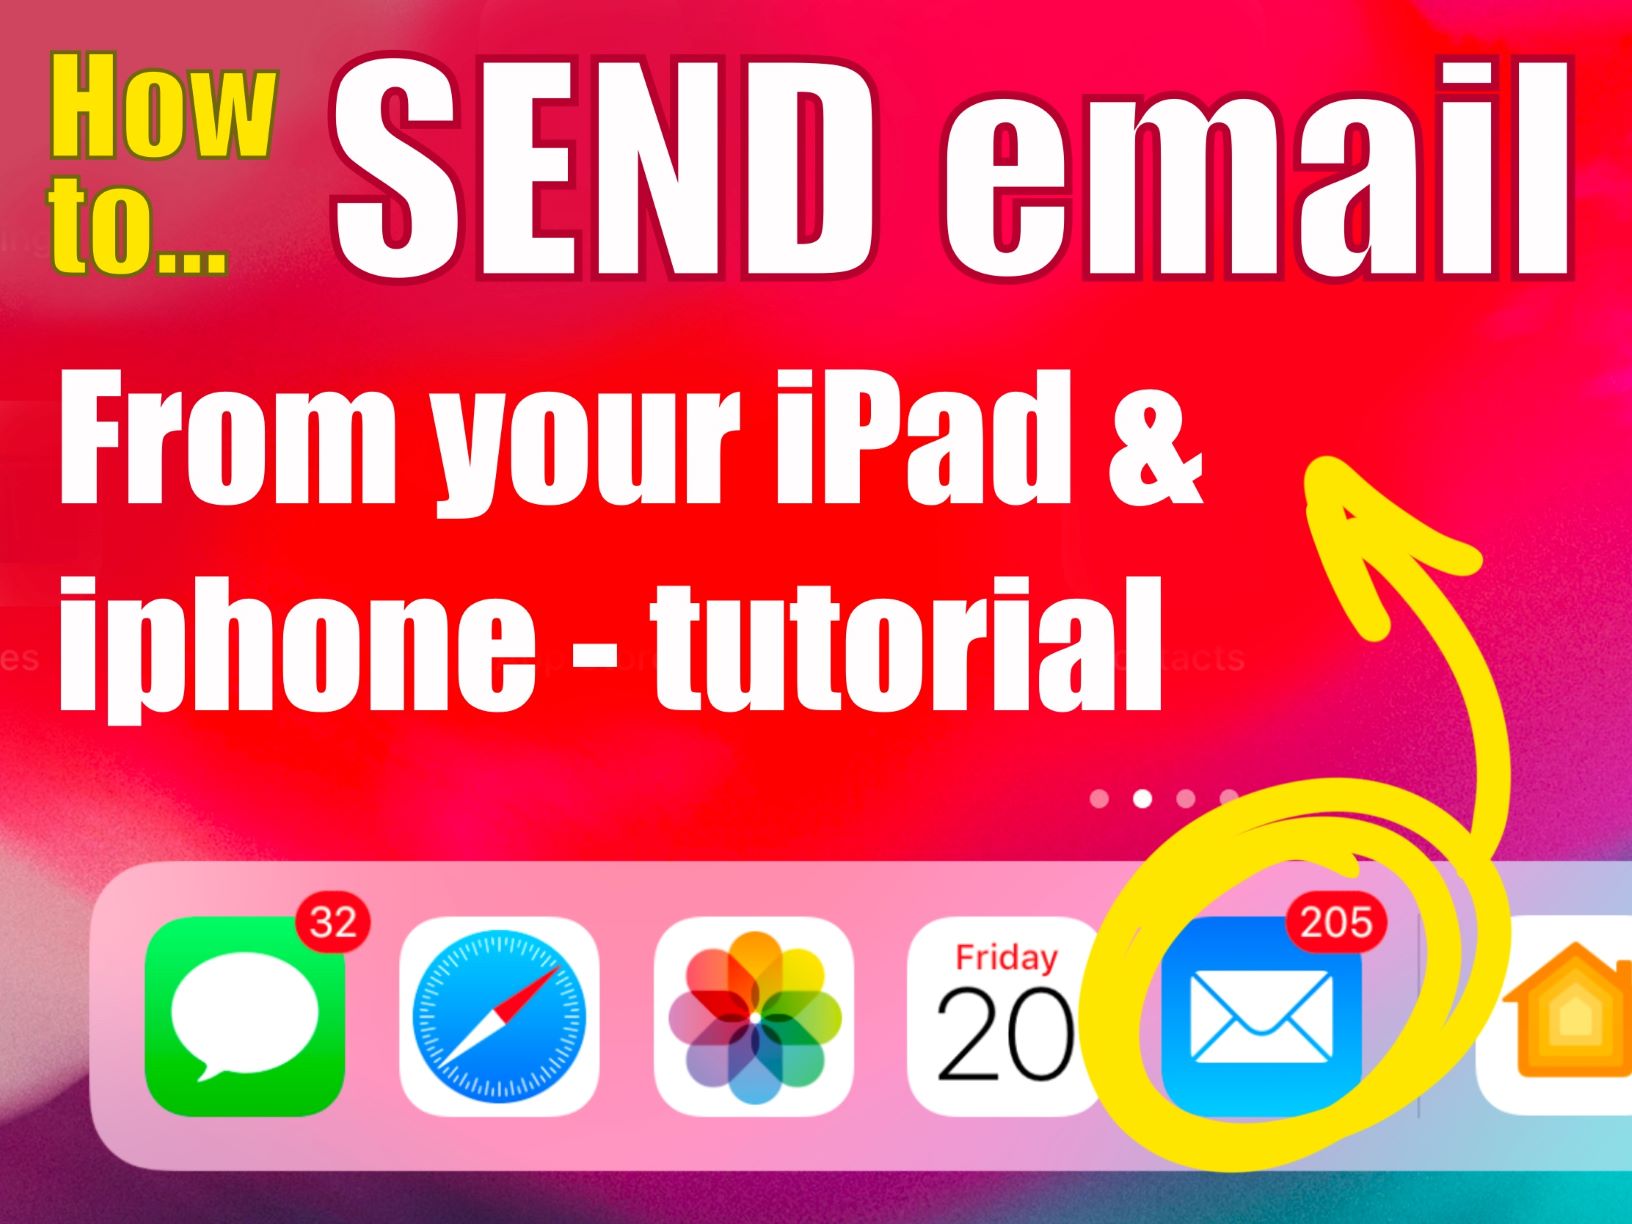 How to send email from iPad and iPhone